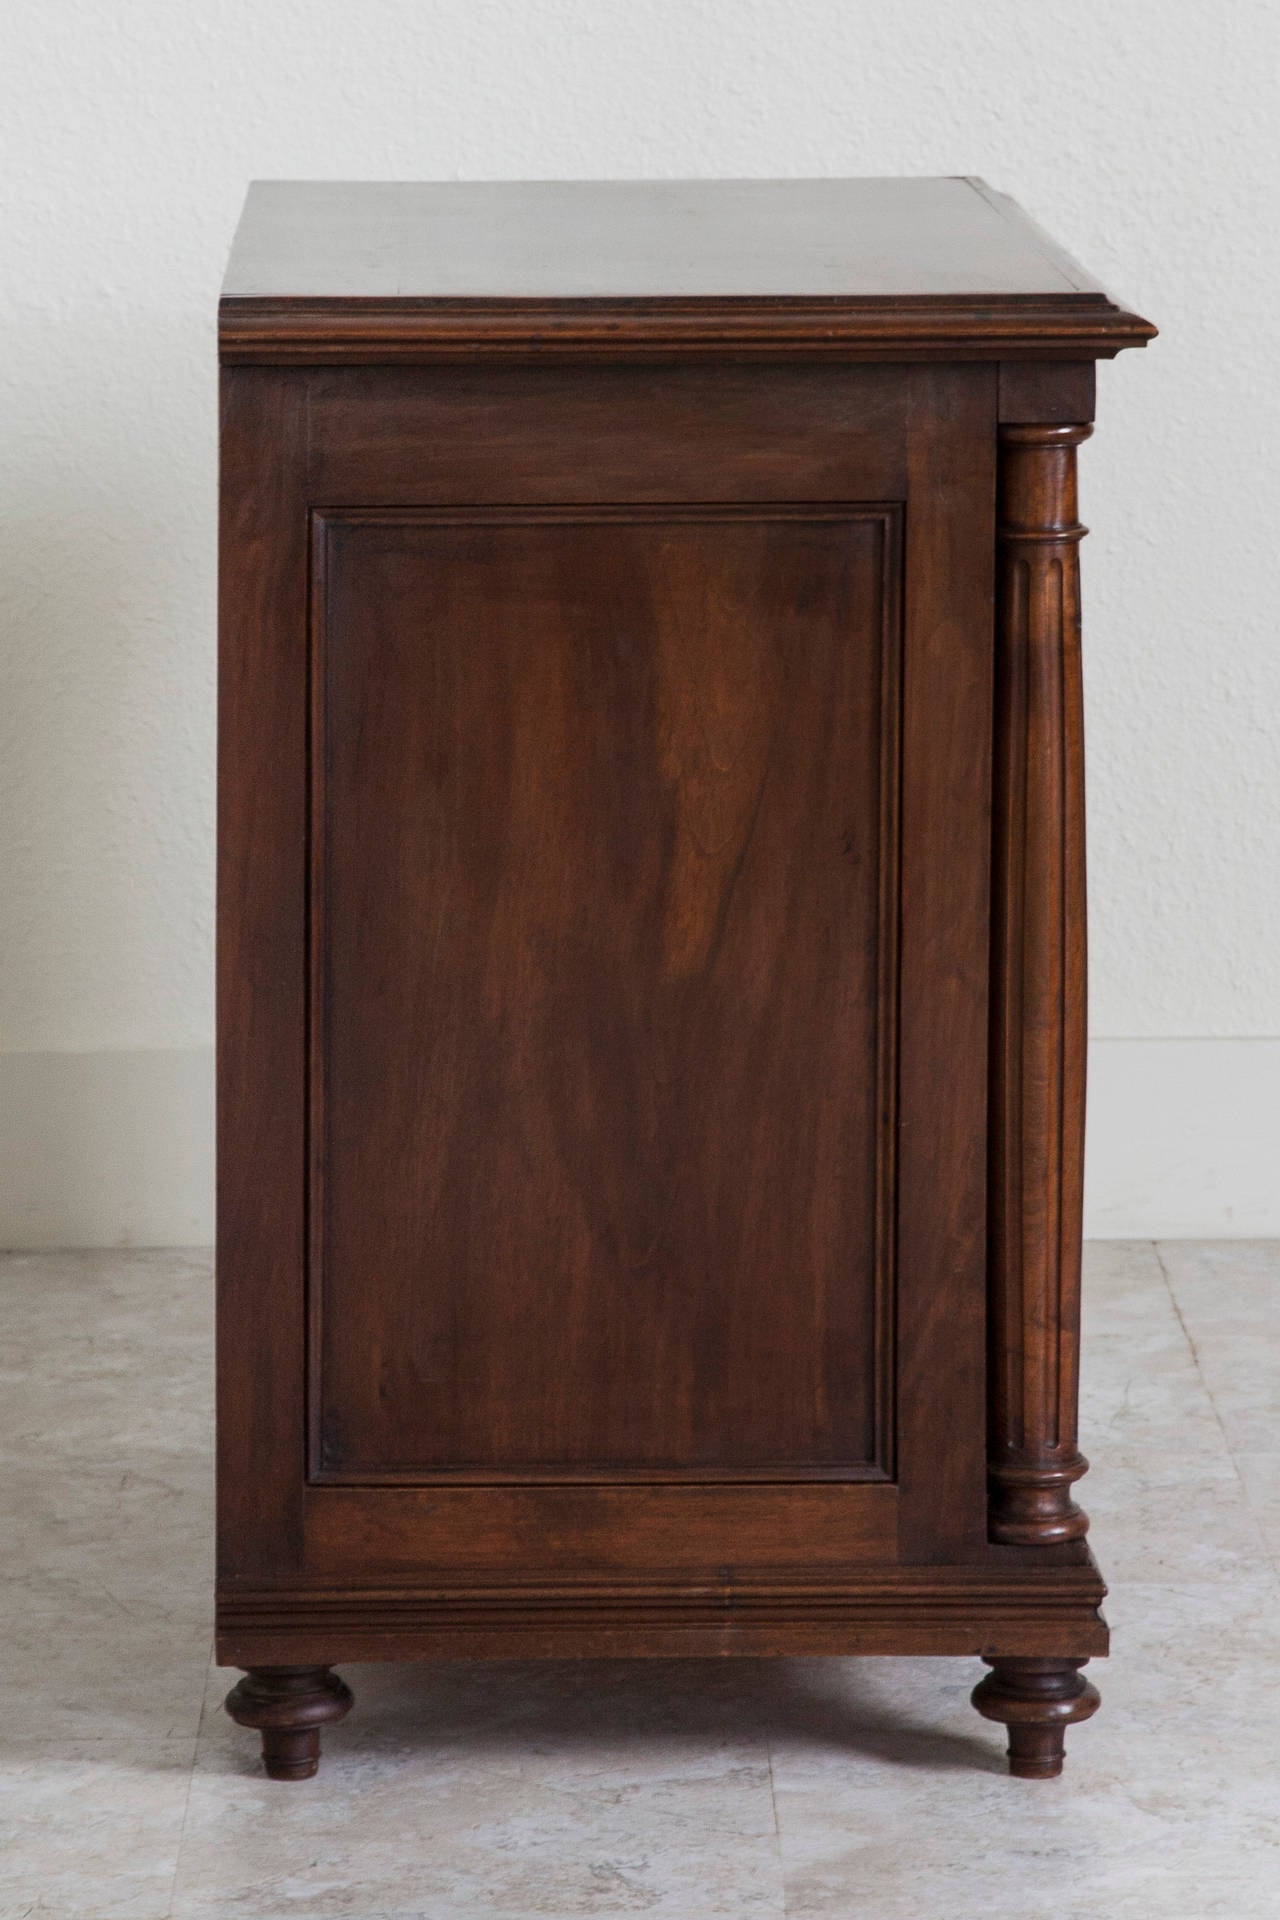 This handsome small-scale walnut chest features four locking drawers flanked by fluted columns. Its simple lines allow it to mix with a variety of interiors, and its smaller size makes it ideal for use beside a bed or in a small entryway. Found in